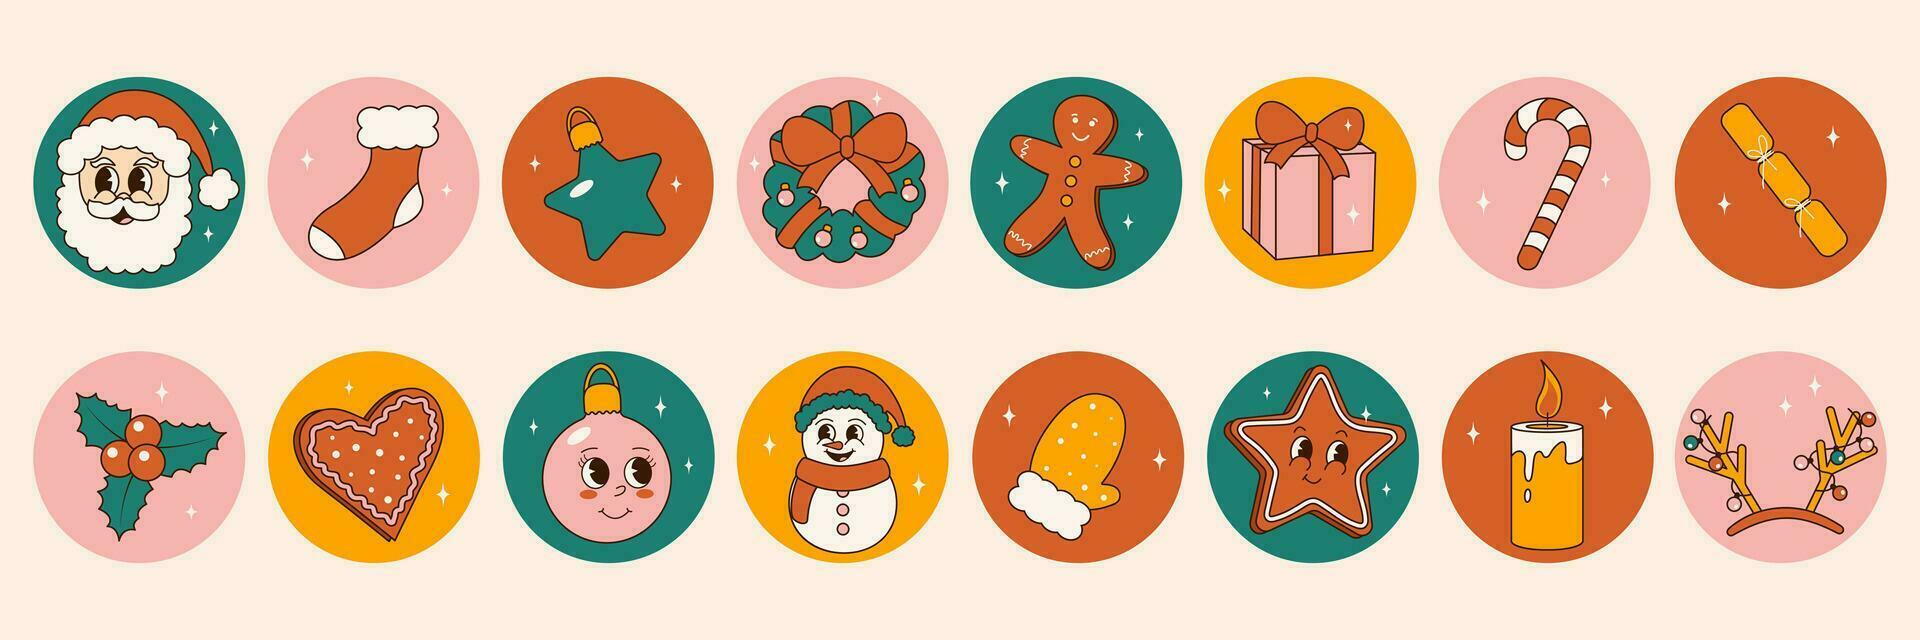 Groovy 70s Christmas sticker set. Trendy retro cartoon style. Comic cartoon characters and elements. vector